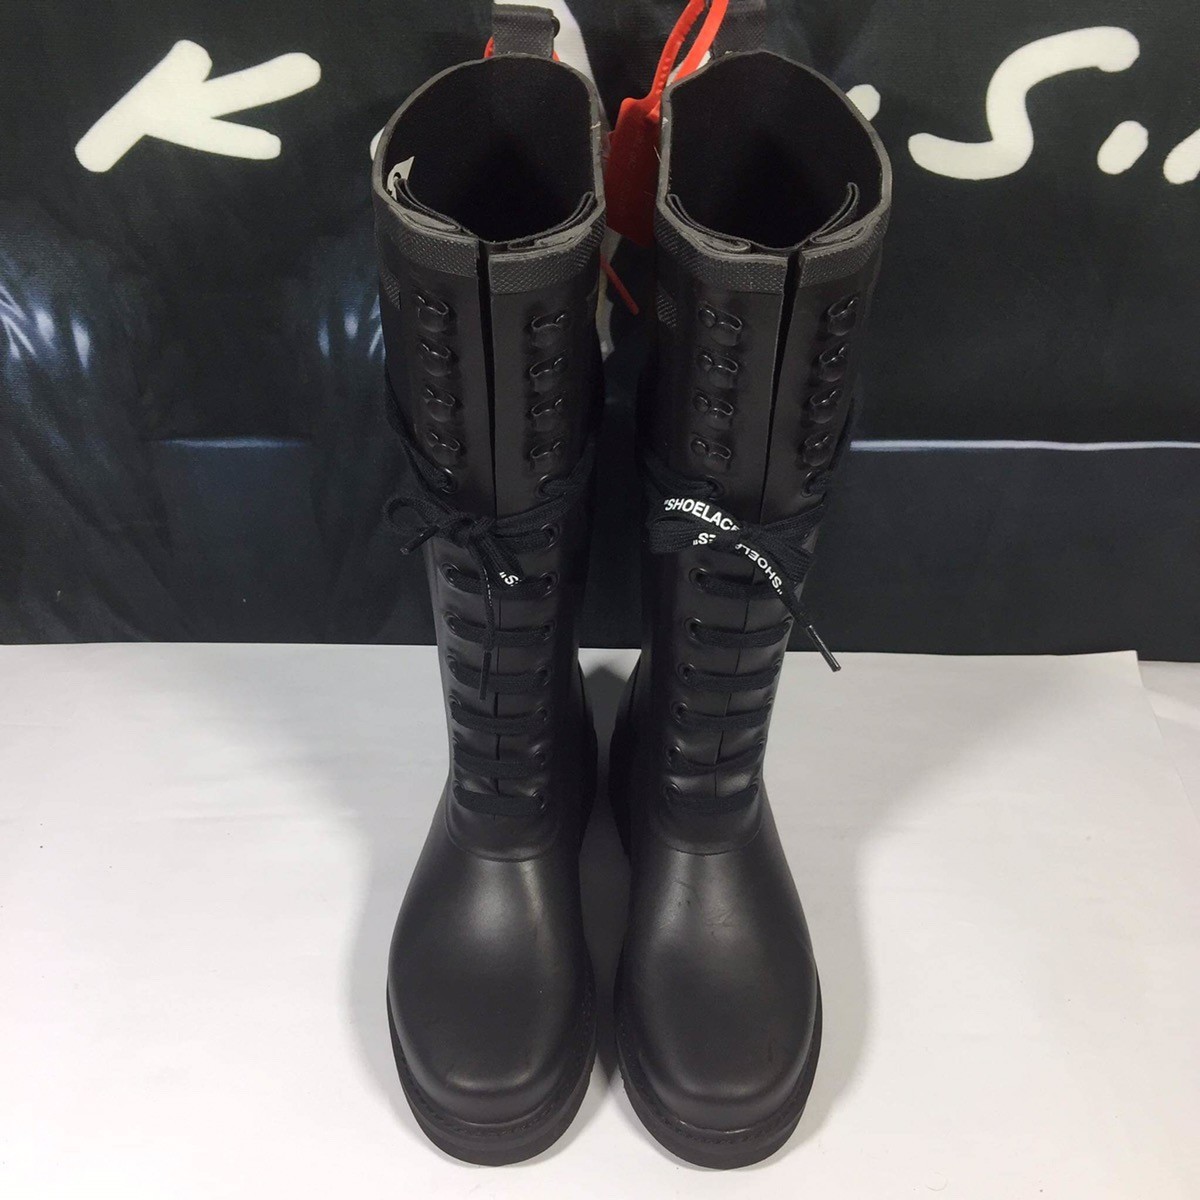 “For Riding “ Black Rubber Boots - 4